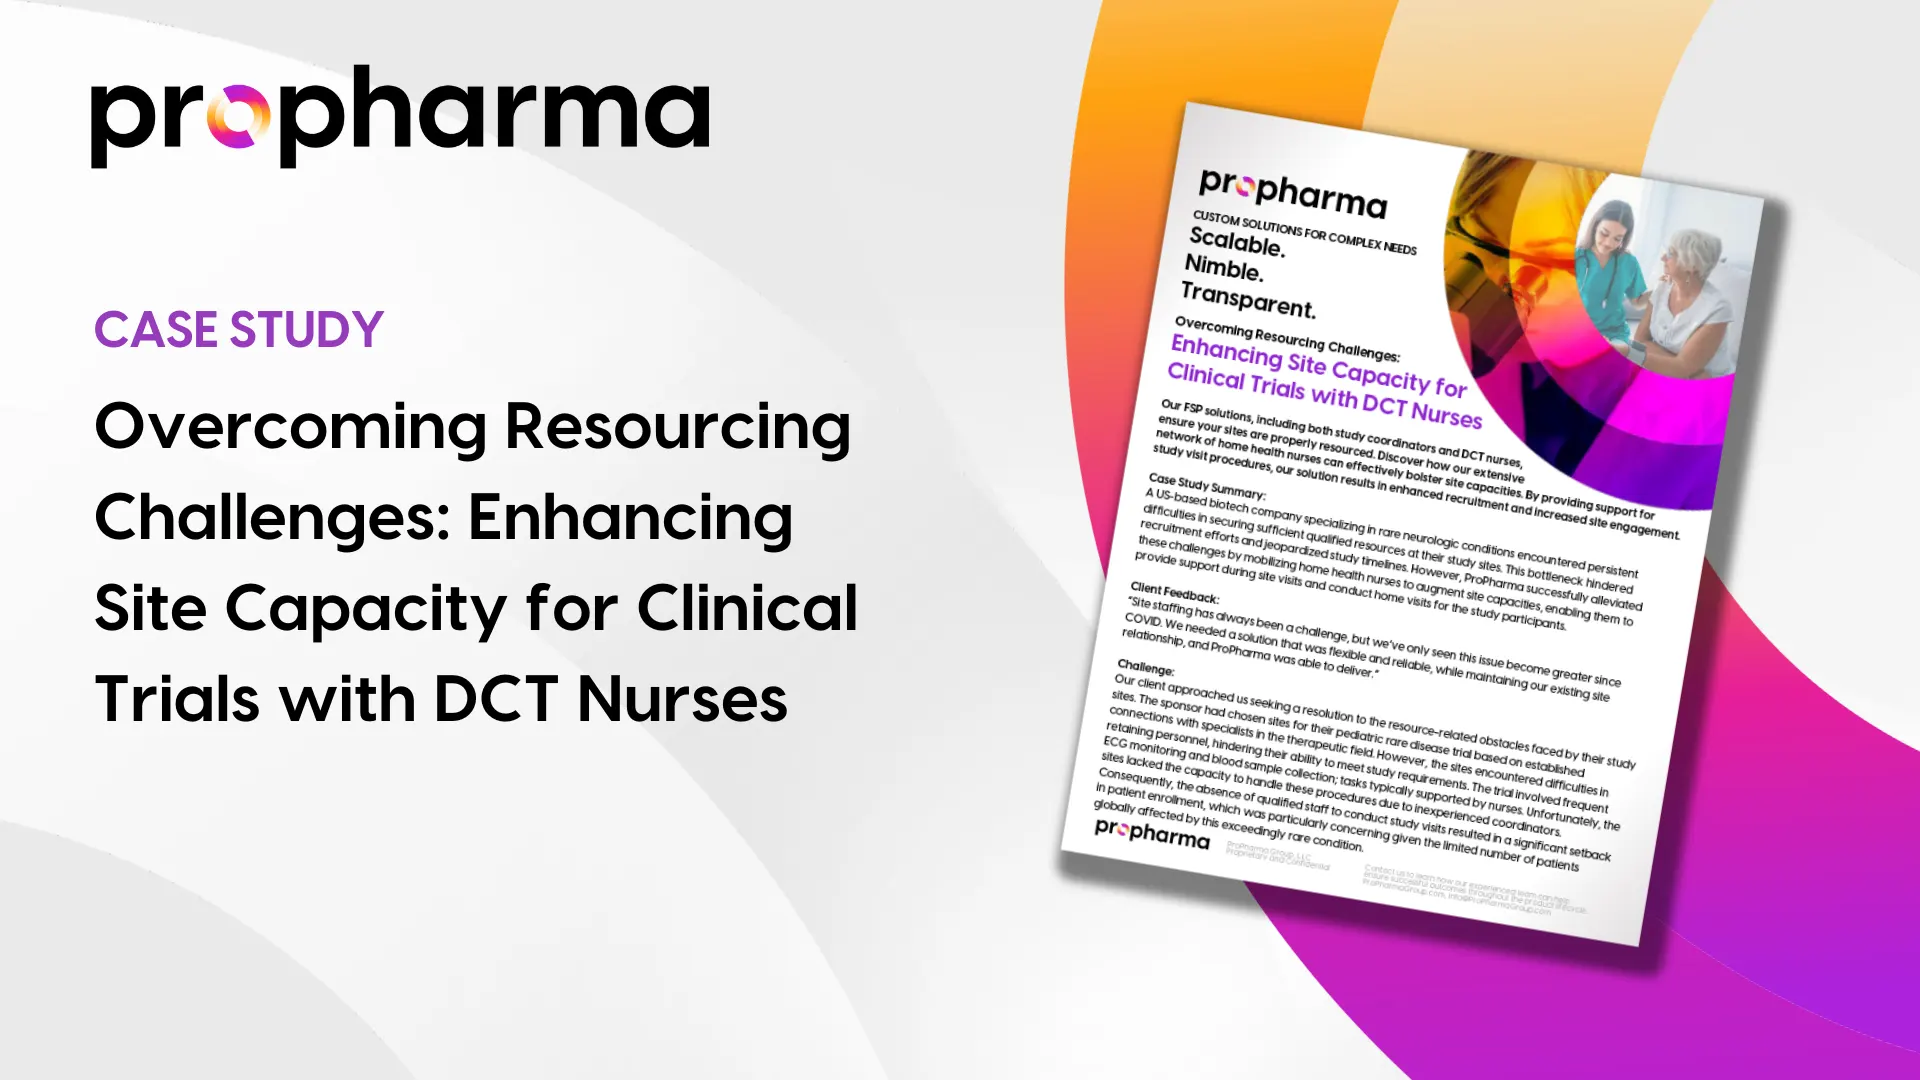 Enhancing Site Capacity for Clinical Trials with DCT Nurses Case Study